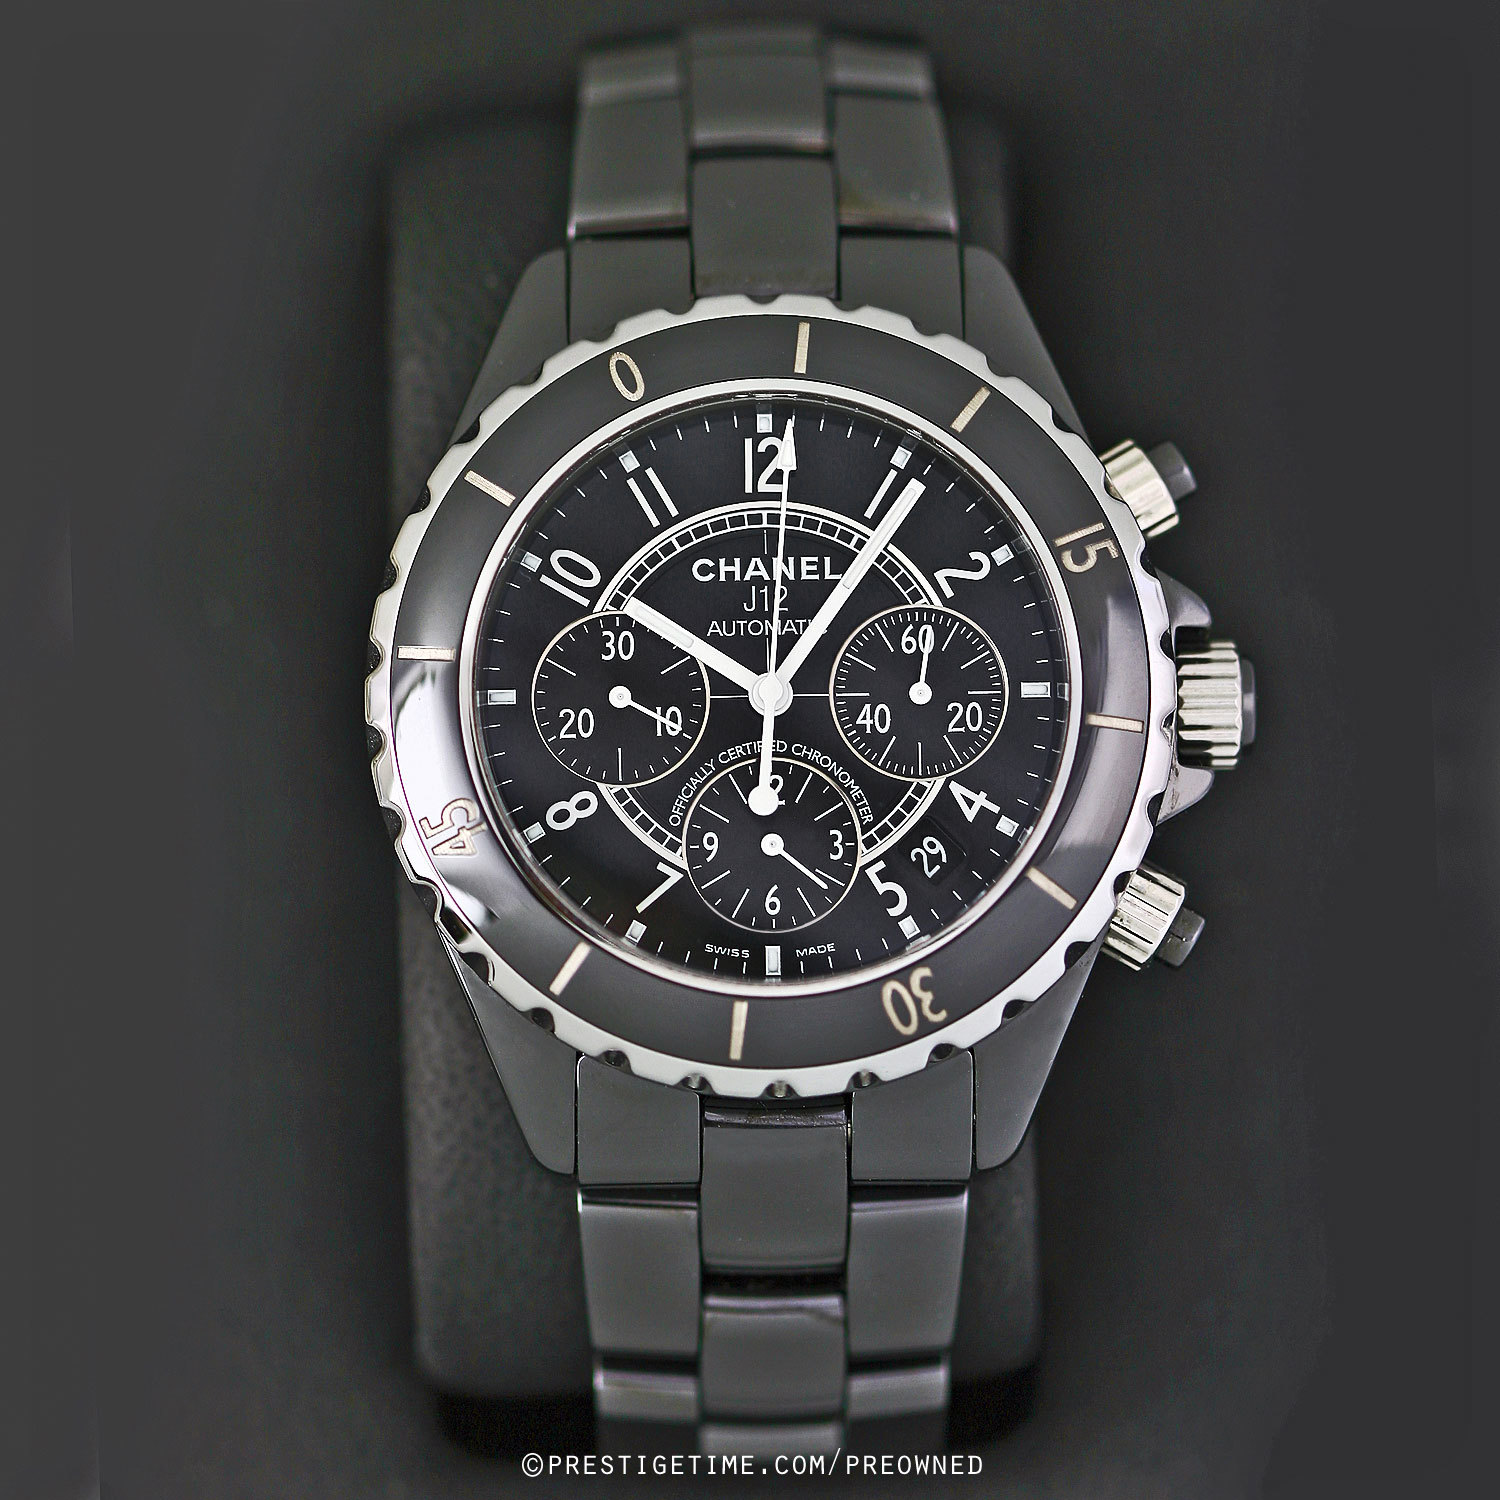 Used Chanel J12 Chrono watches for sale - Buy luxury watches from Timepeaks